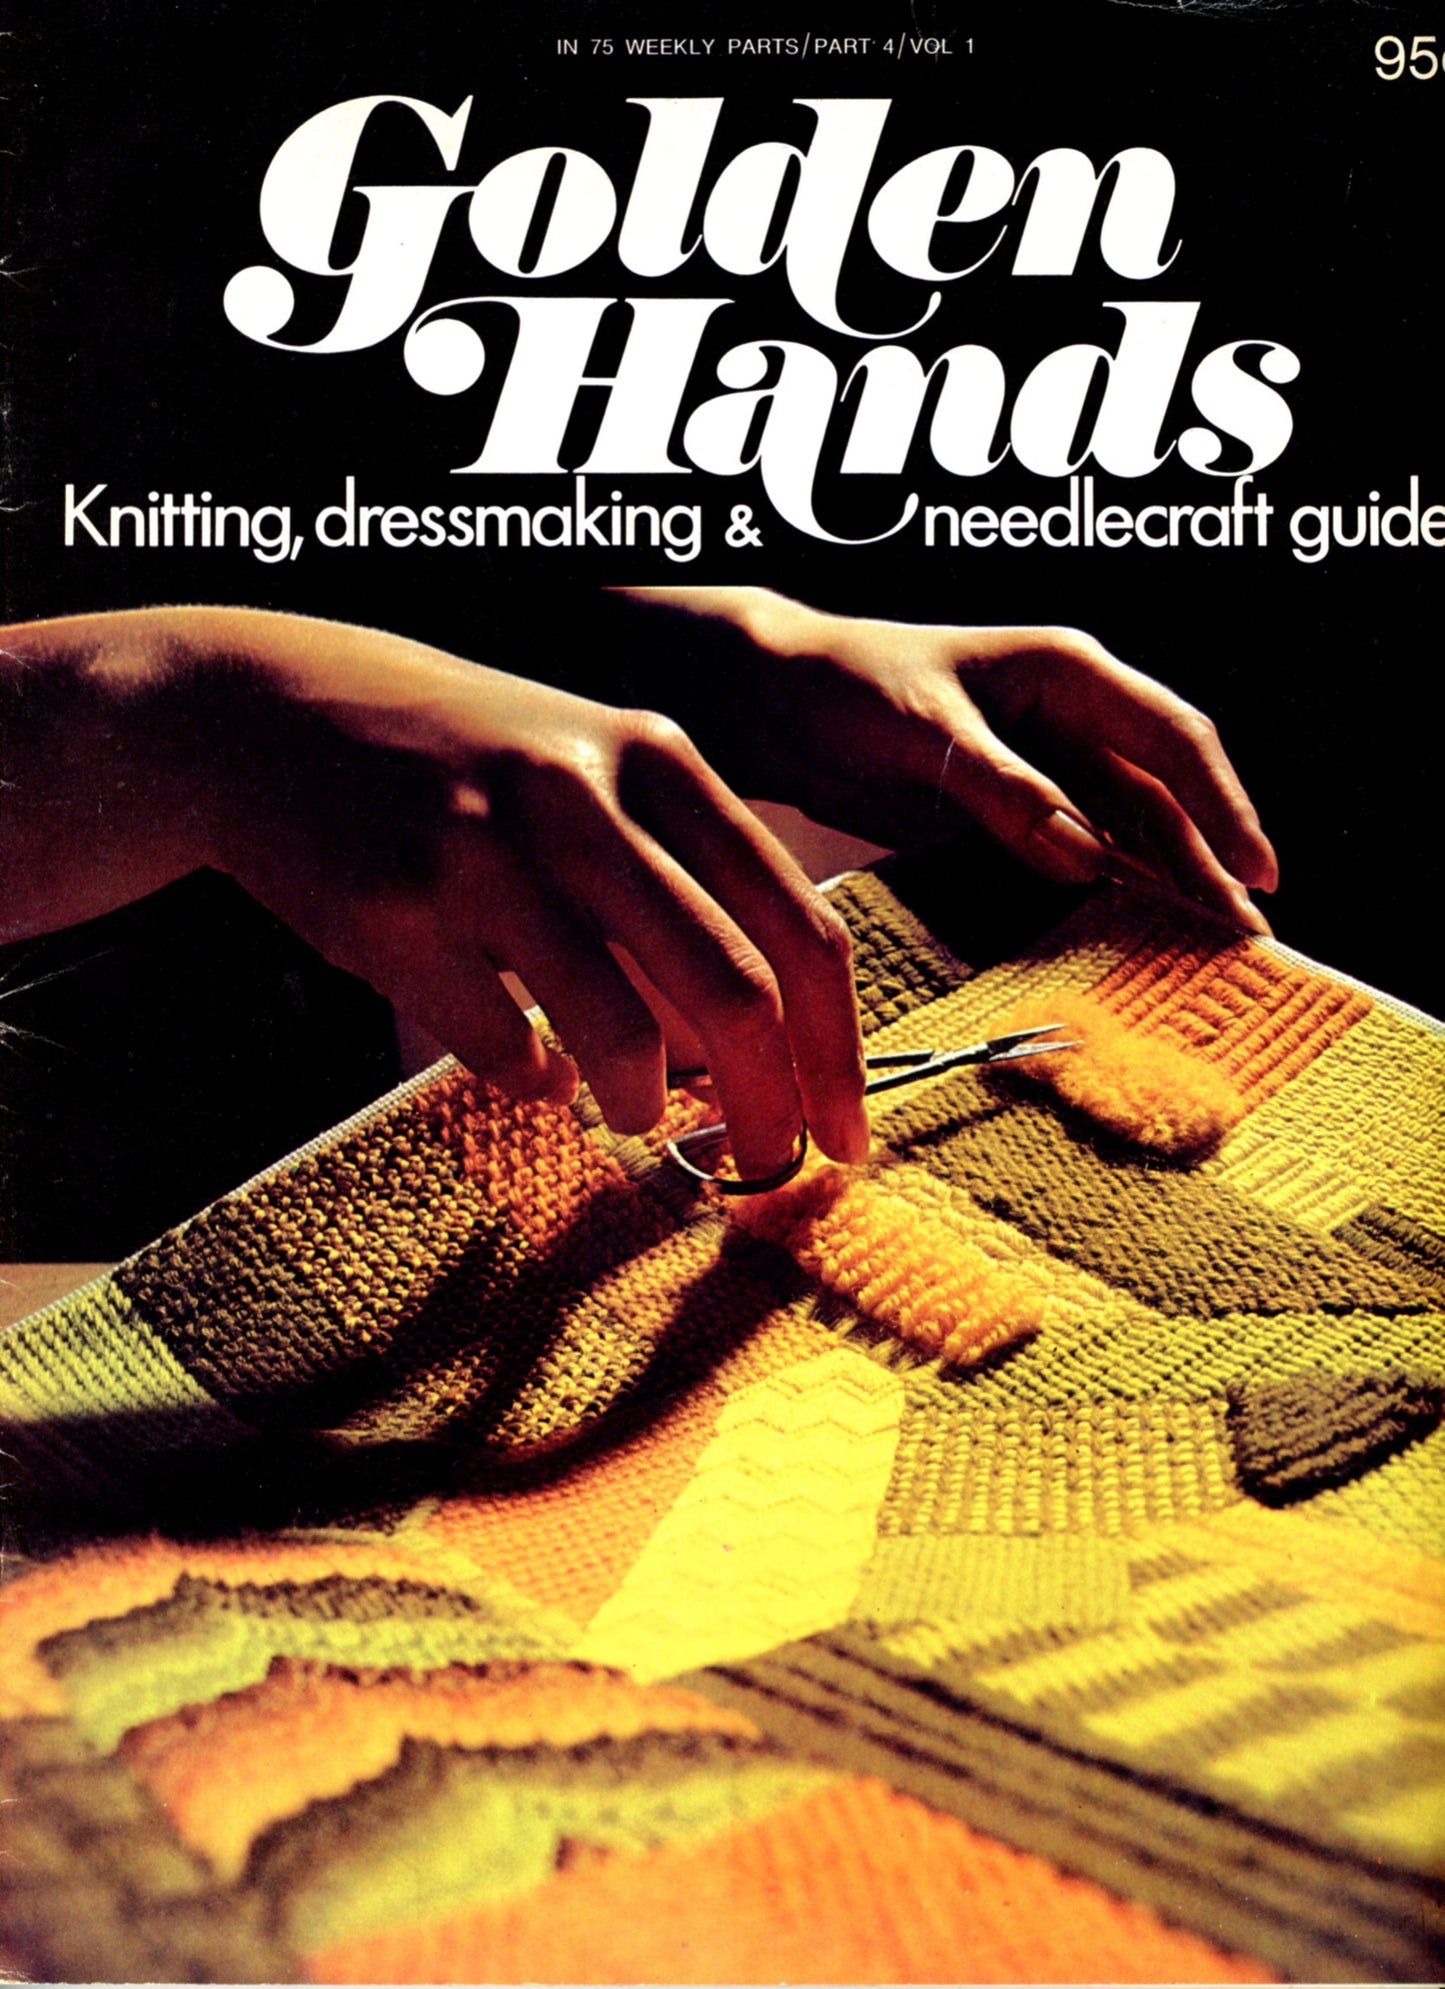 GOLDEN HANDS by Marshall Cavendish Ltd. London, England Copyright © 1971 Weekly Publication Volume 1 Parts 1 - 15 Sold Each